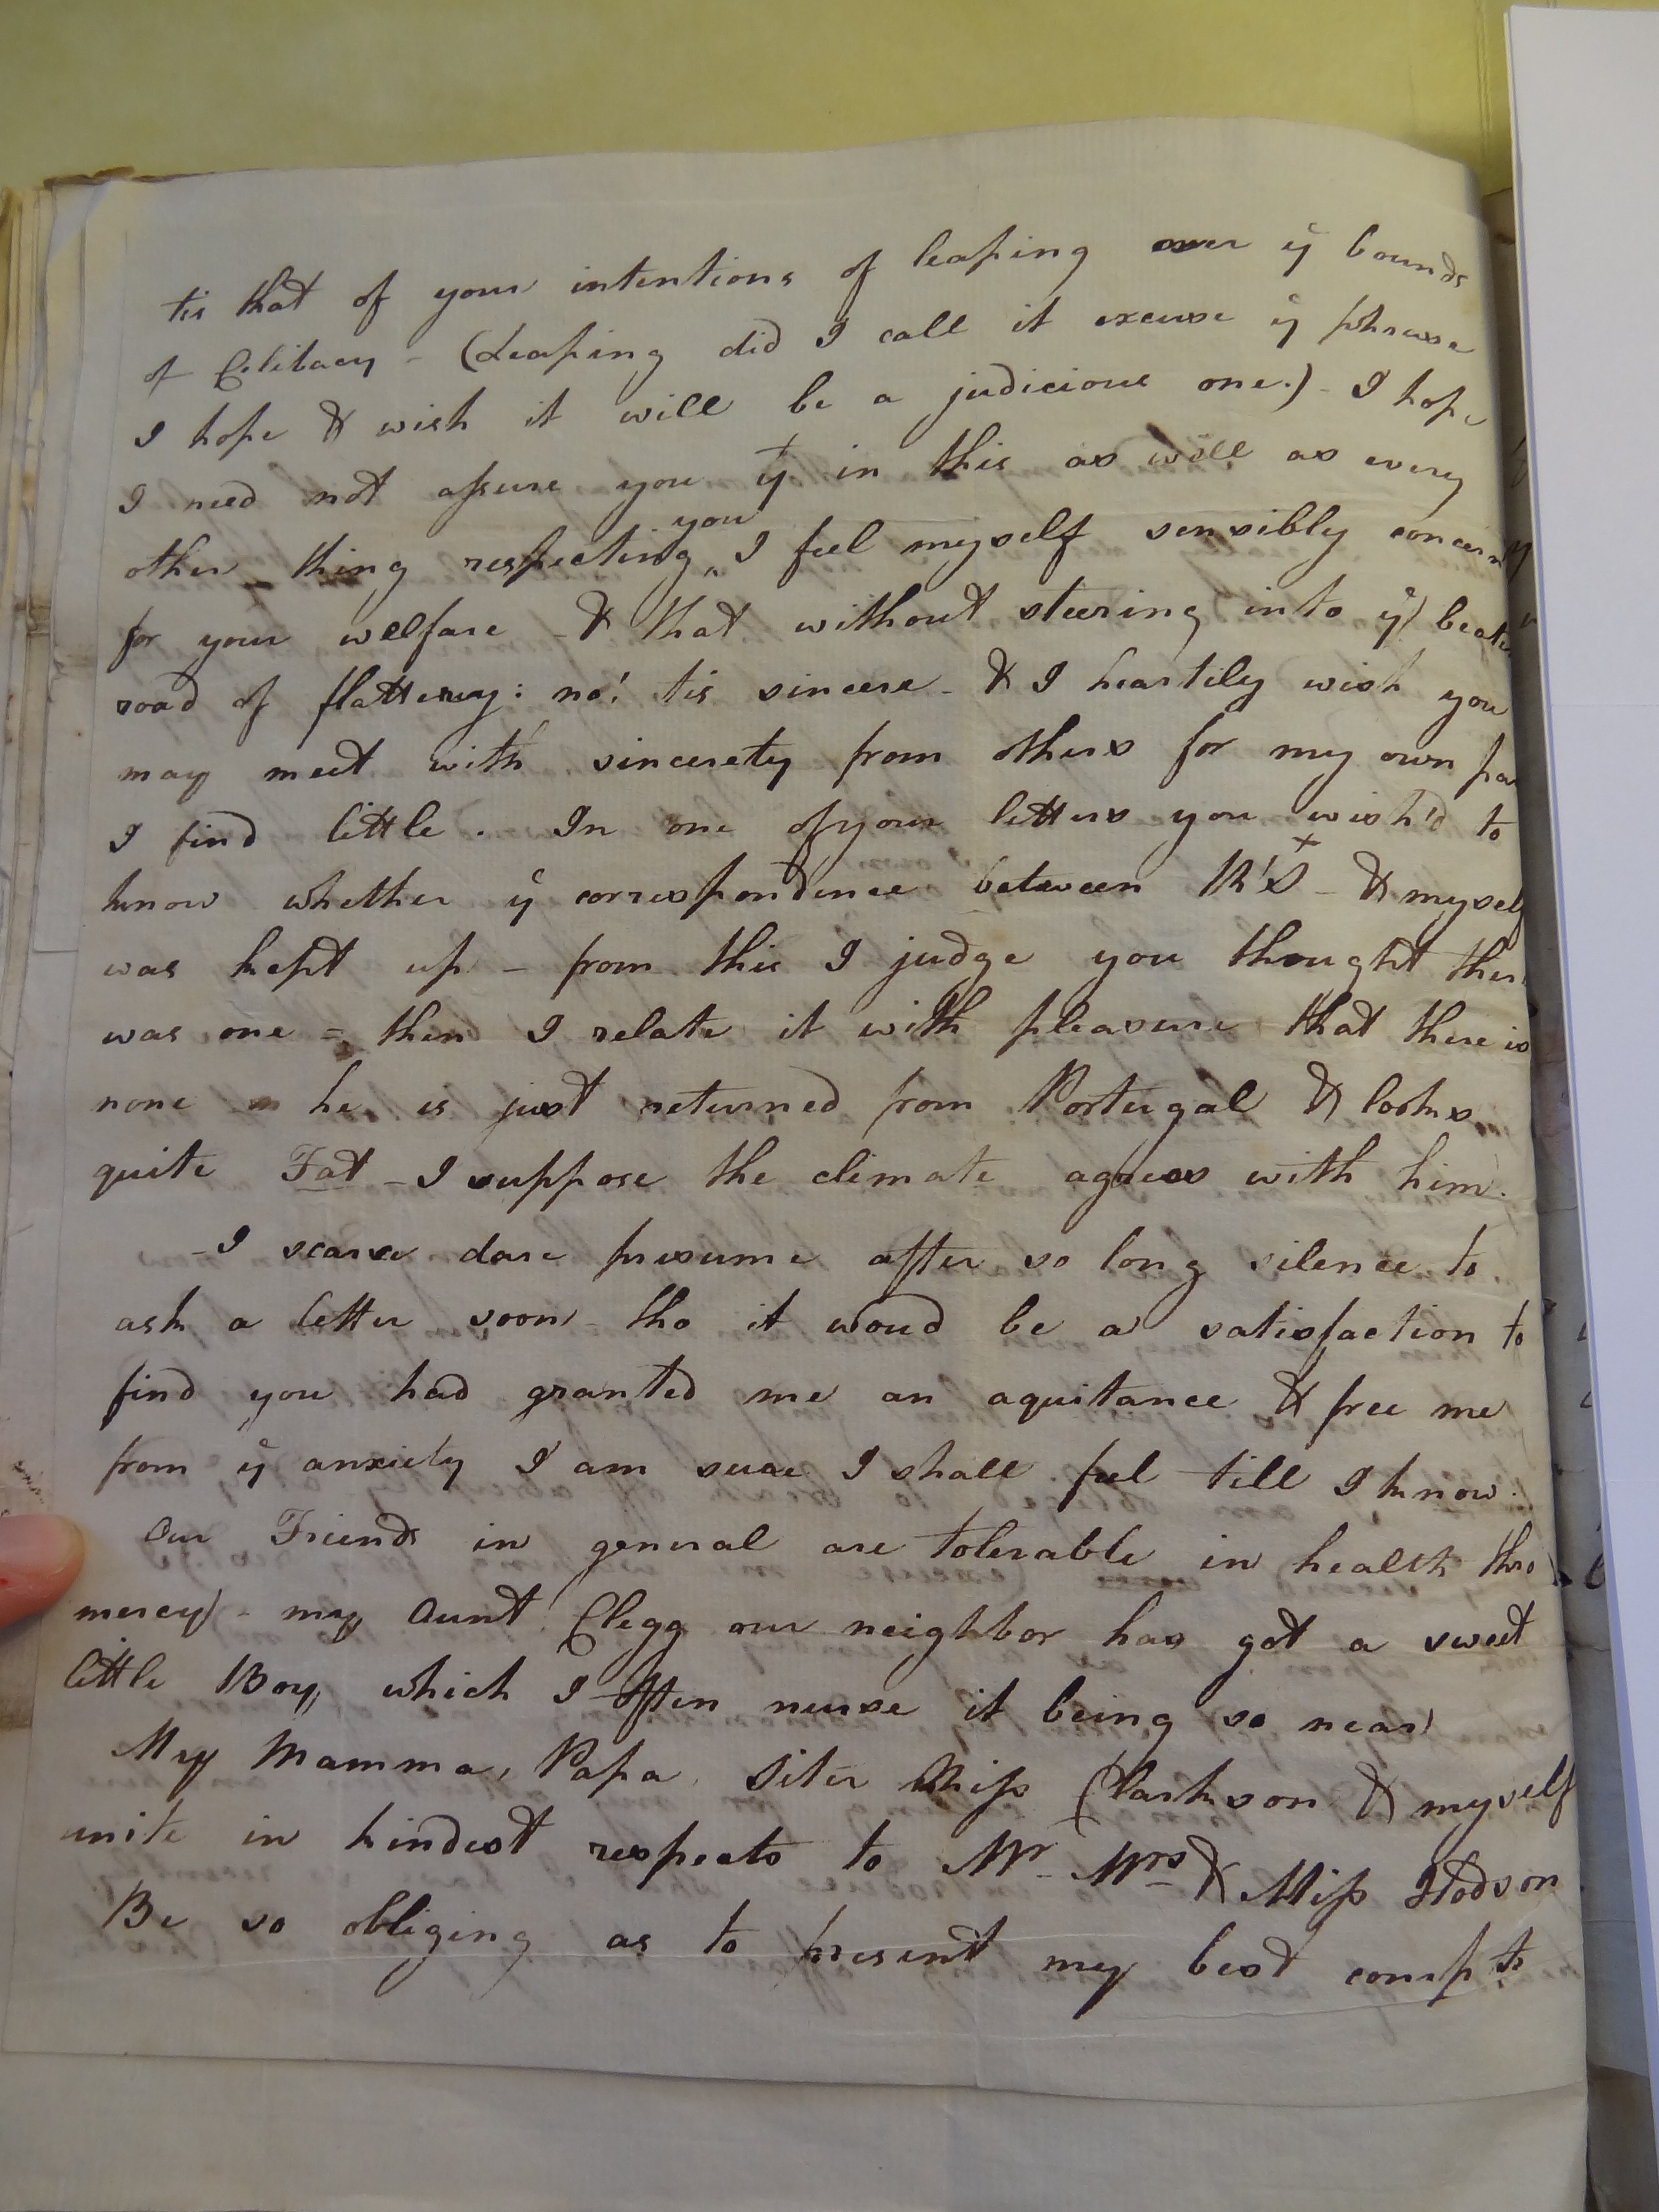 Image #2 of letter: Rebekah Bateman to Mary Jane Hodson, 4 March 1784